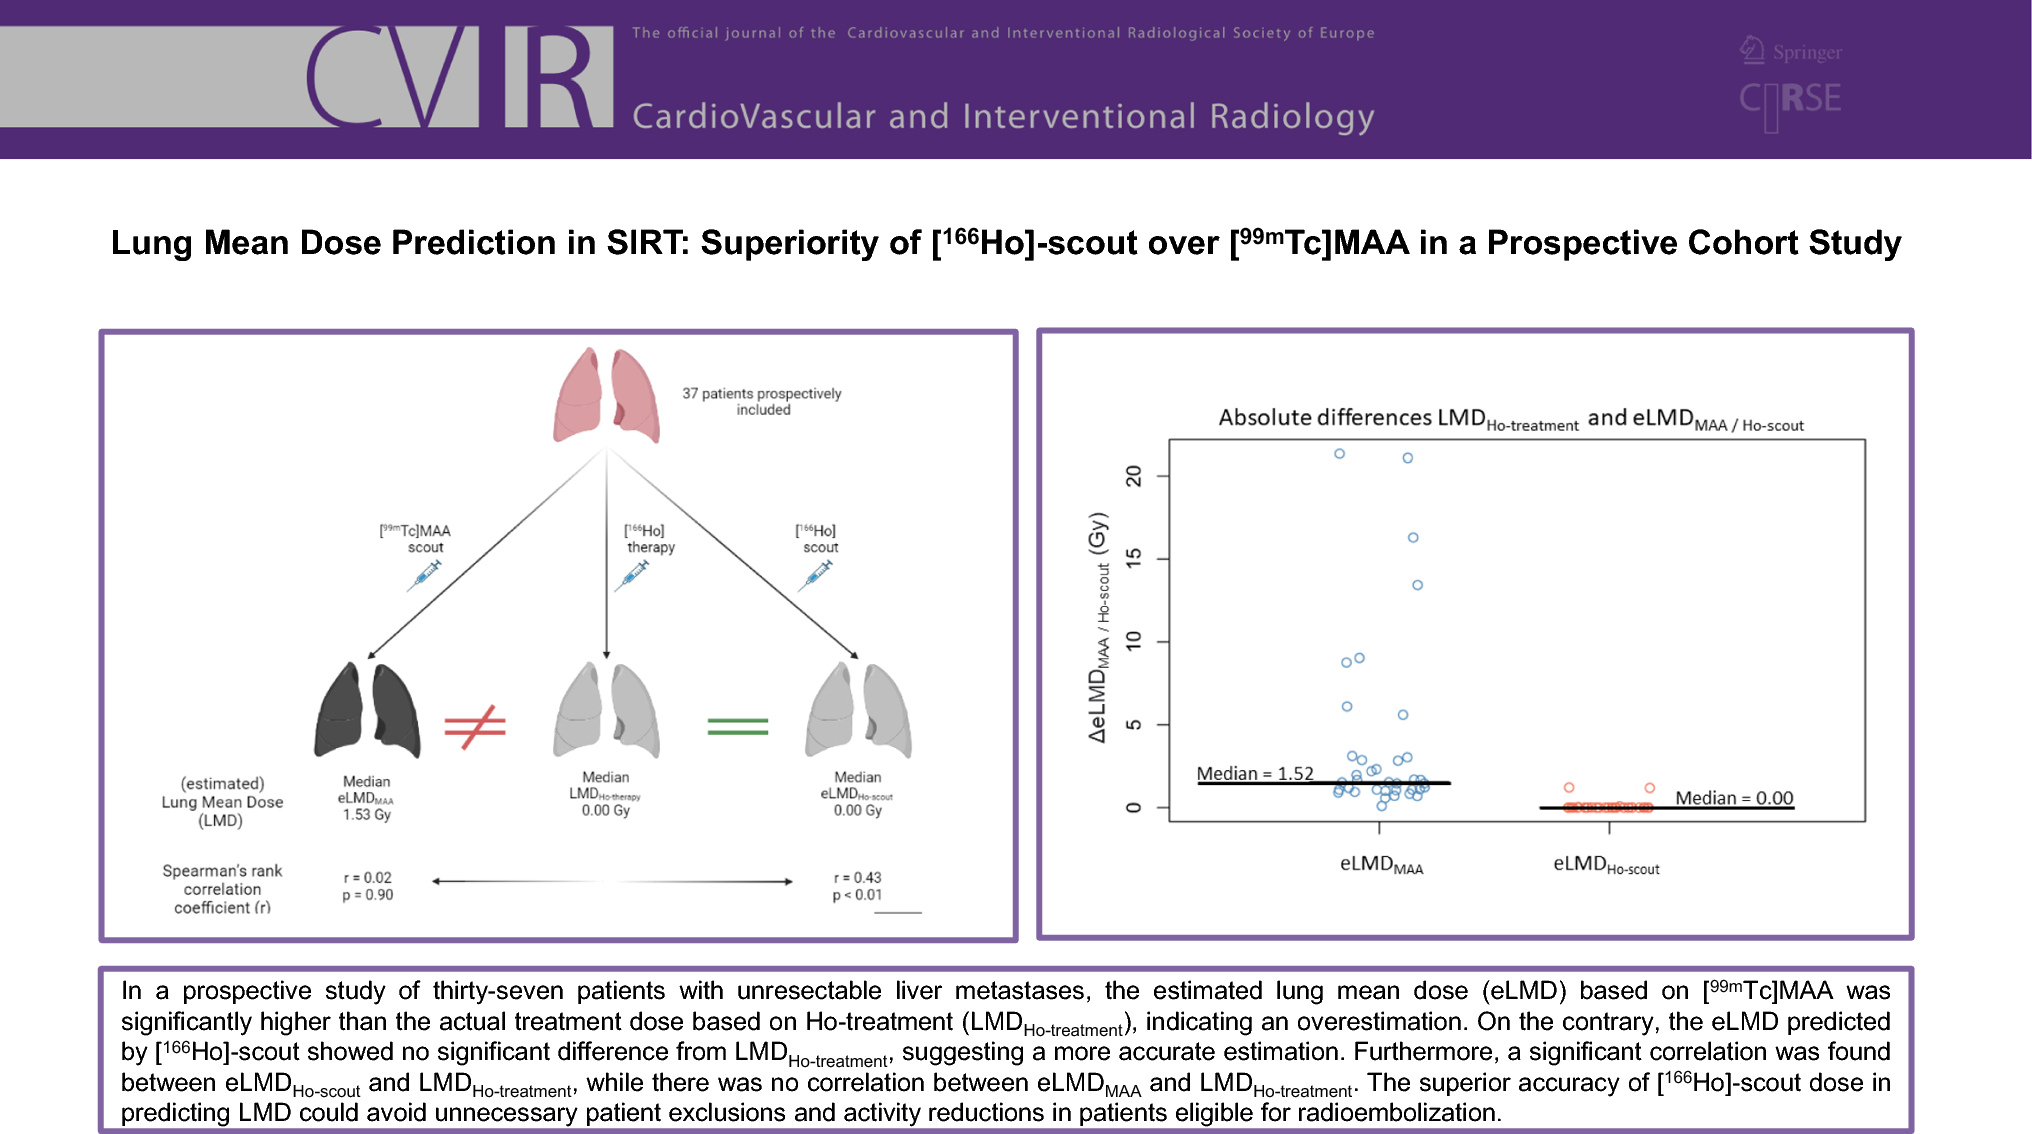 Lung Mean Dose Prediction in Transarterial Radioembolization (TARE): Superiority of [166Ho]-Scout Over [99mTc]MAA in a Prospective Cohort Study